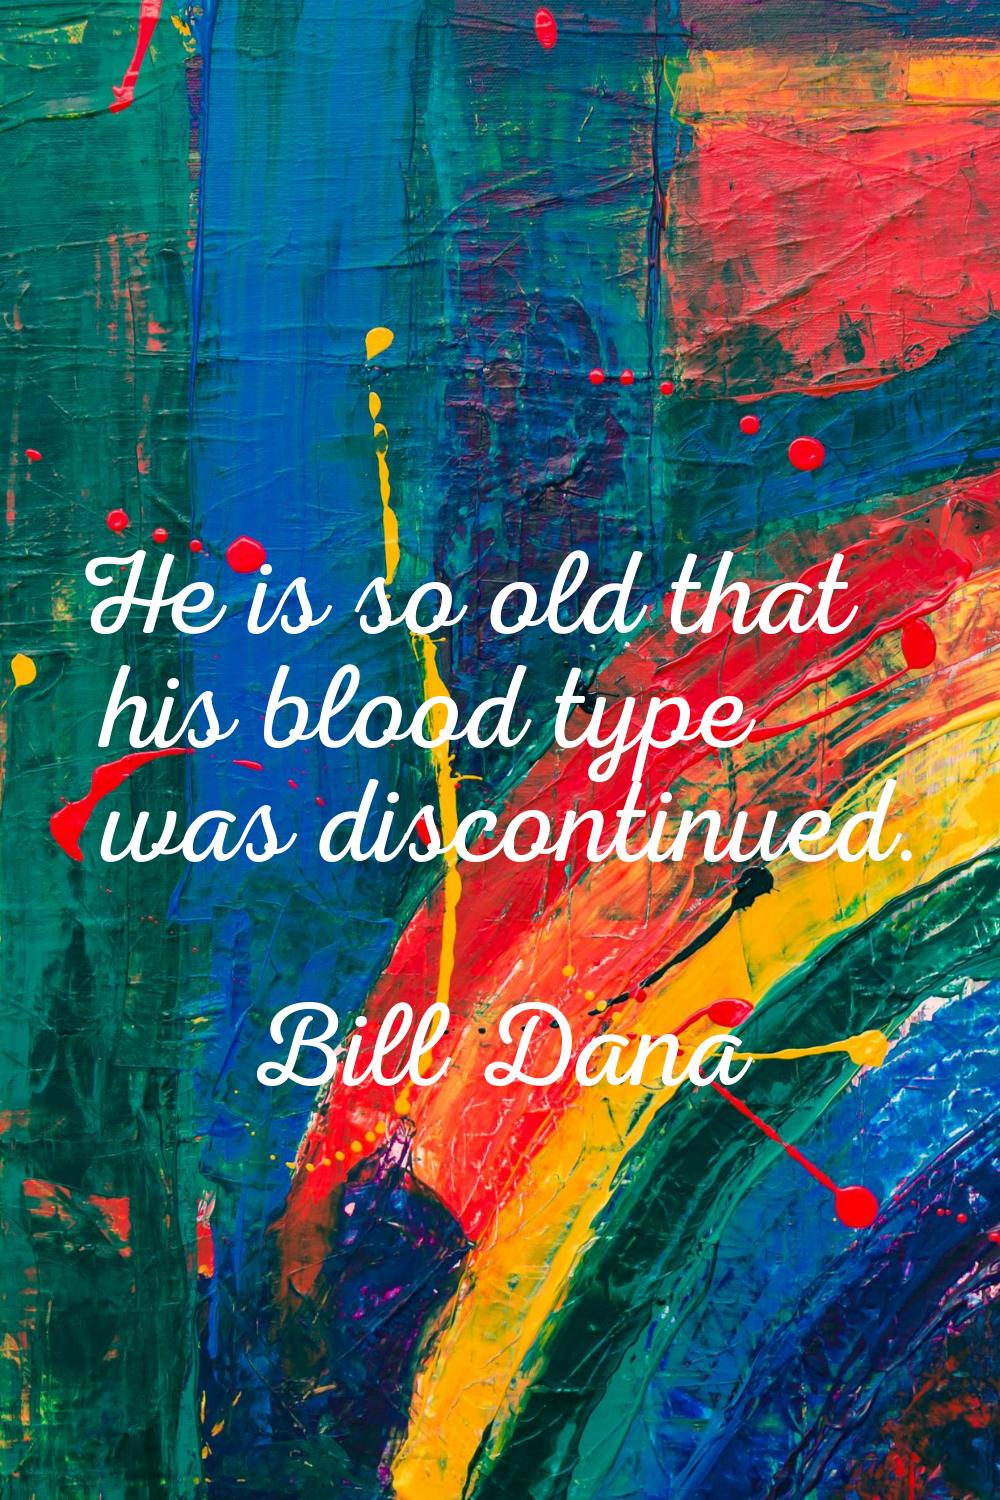 He is so old that his blood type was discontinued.